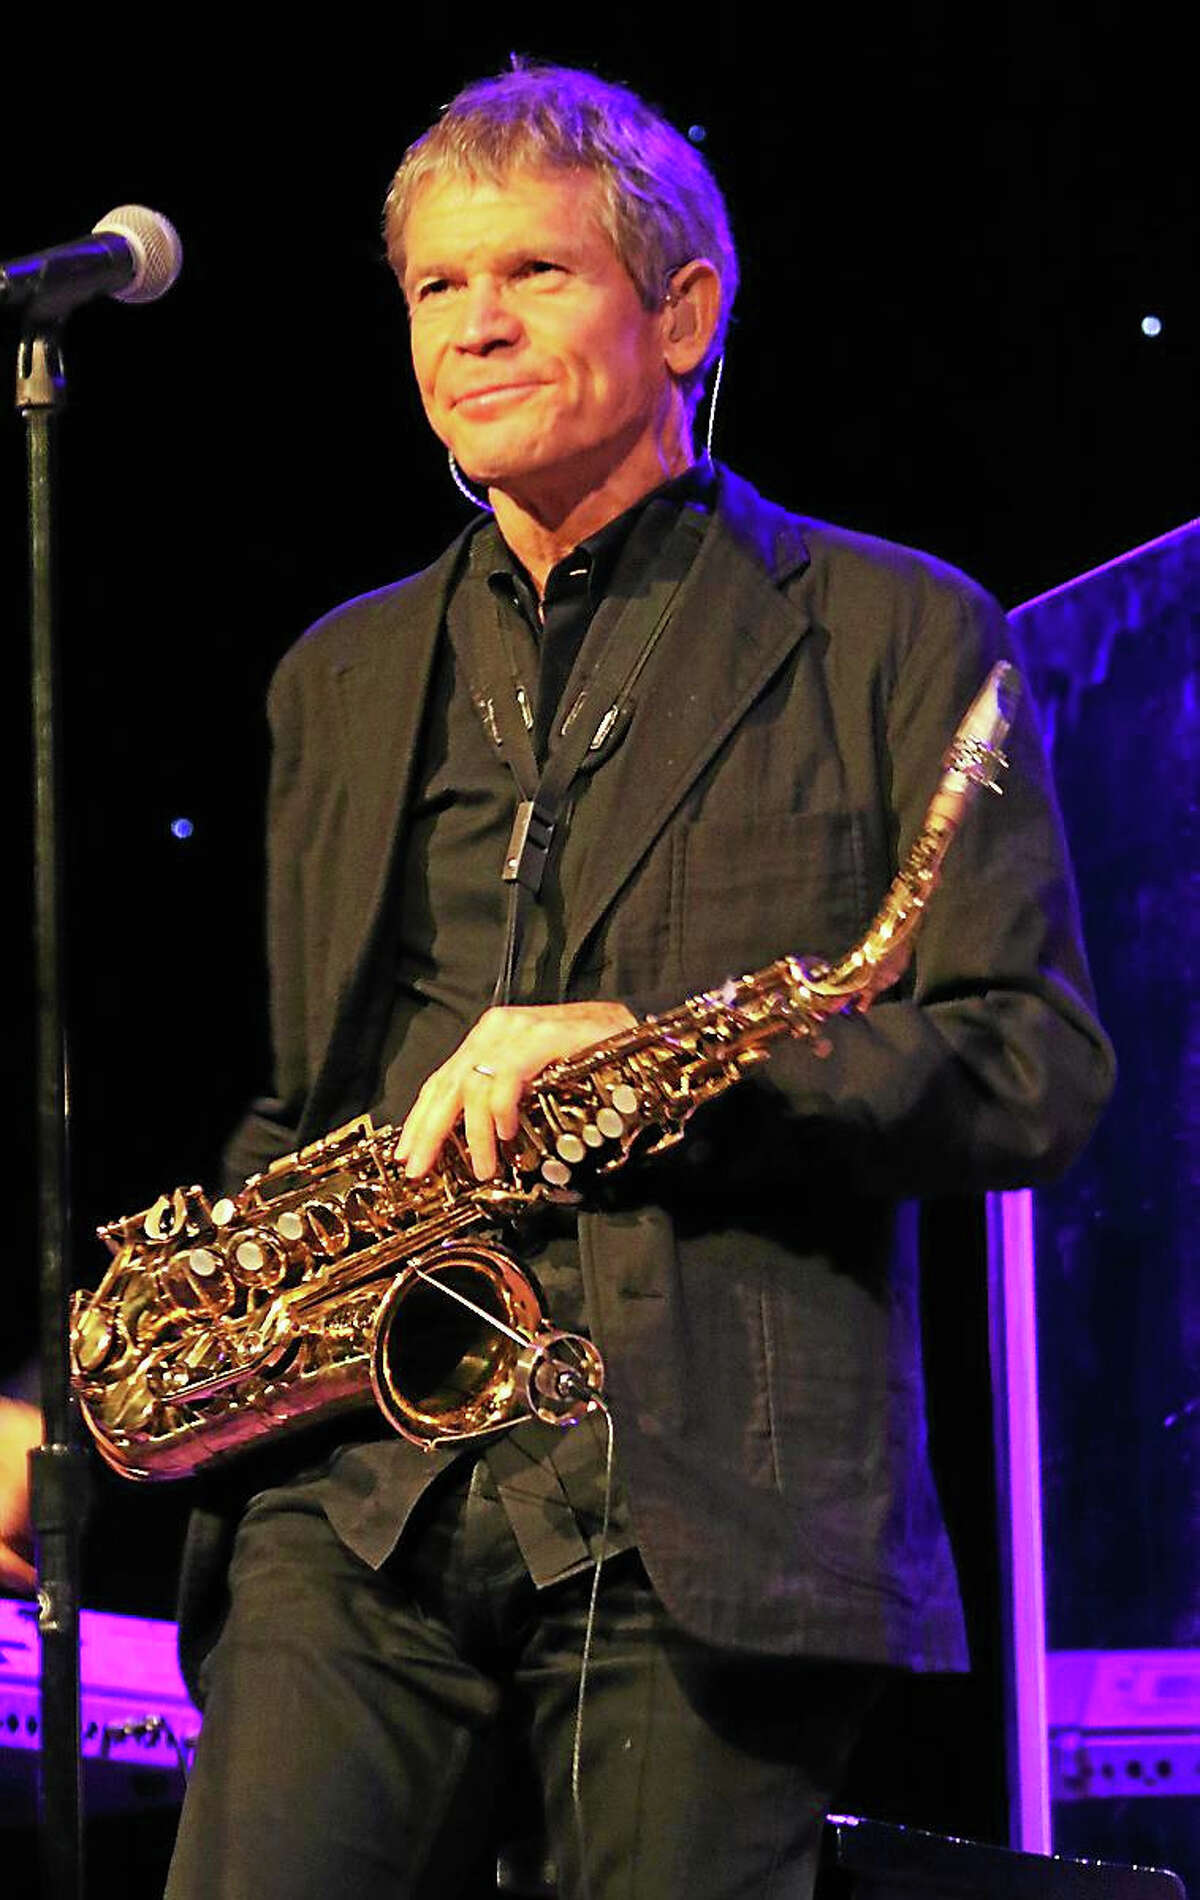 Photo by John AtashianSaxophonist David Sanborn is shown performing on stage during his afternoon concert performance at the Infinity Music Hall & Bistro in Hartford on Sunday Nov. 22. One of the most successful saxophonists to earn prominence since the 1980s, musician David Sanborn is now on tour in support of his brand new CD, “Time and the River.” To learn more, visit www.davidsanborn.com